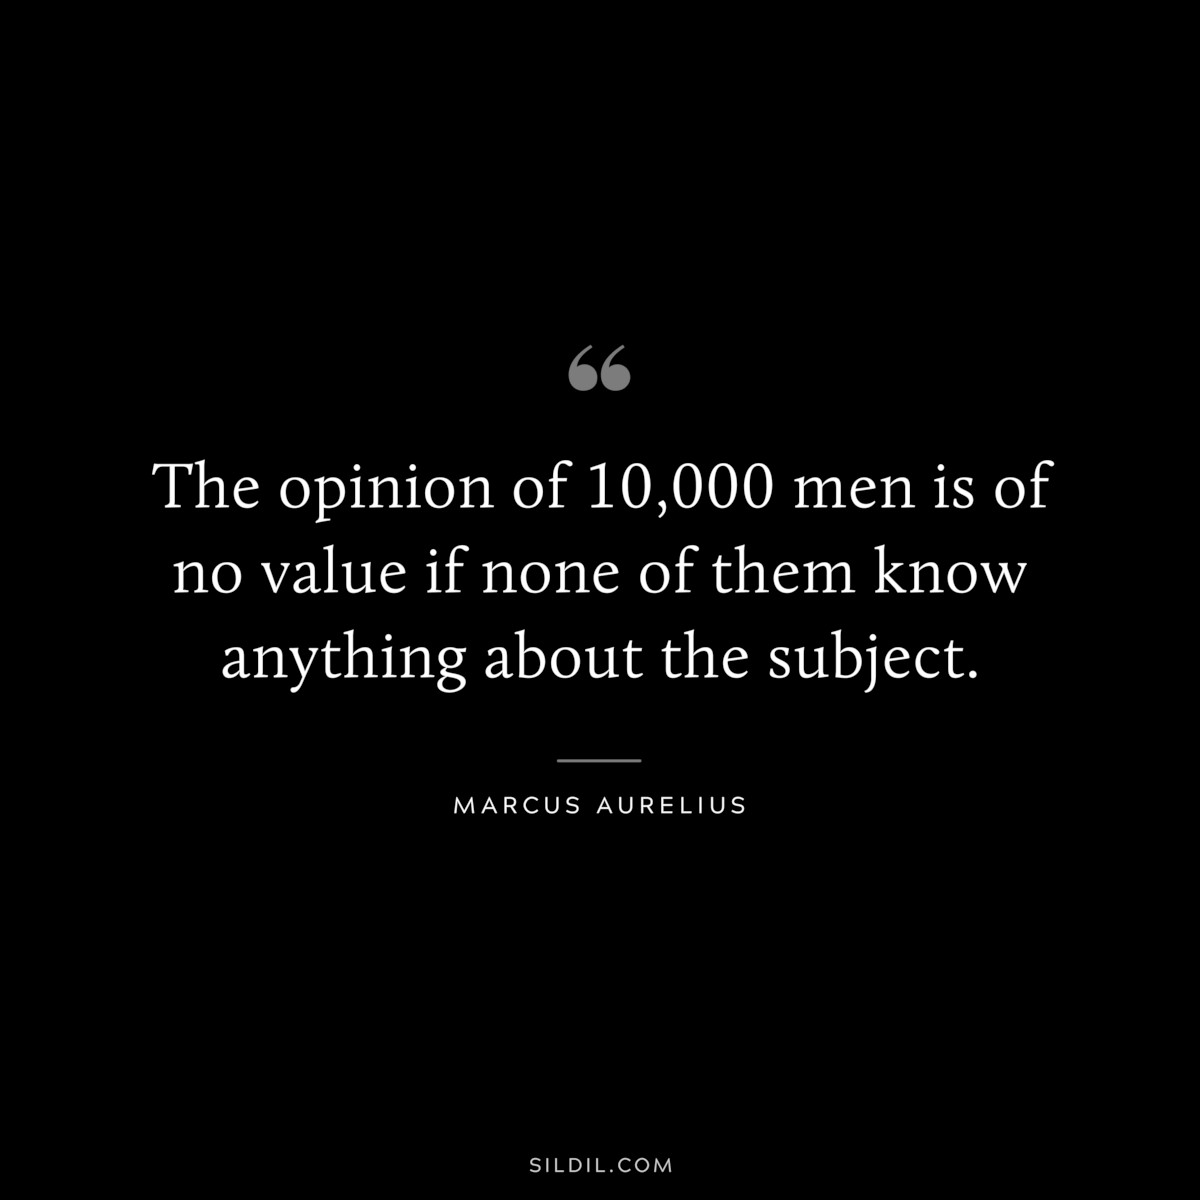 The opinion of 10,000 men is of no value if none of them know anything about the subject. ― Marcus Aurelius